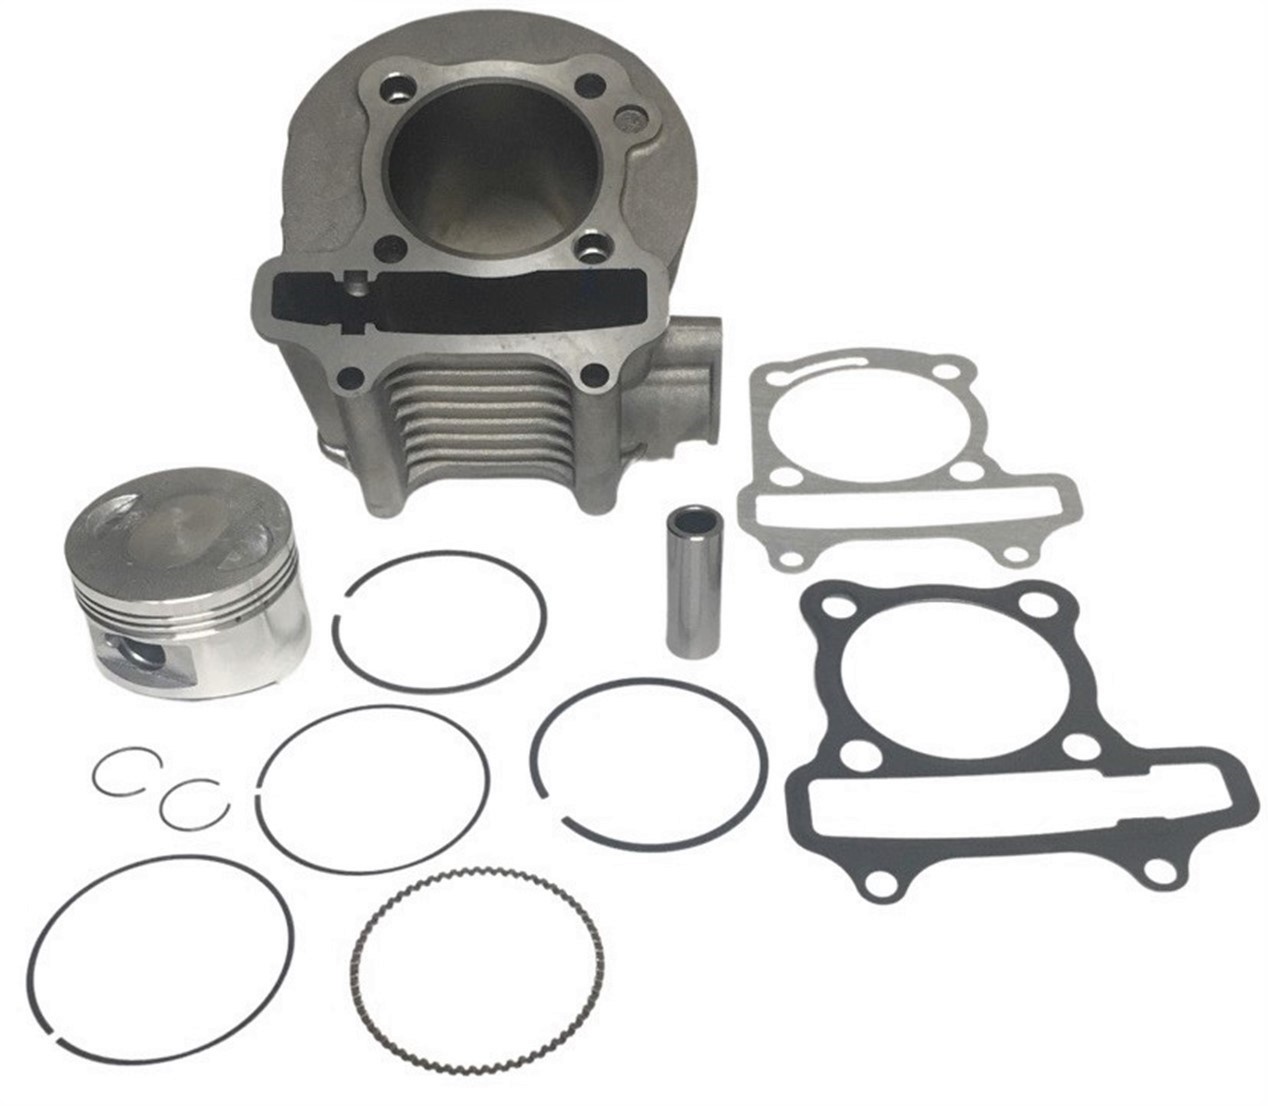 Cylinder Piston Top End Kit 125cc 4 Stroke GY6125 ATVs, GoKarts, Scooters B=52mm - Click Image to Close